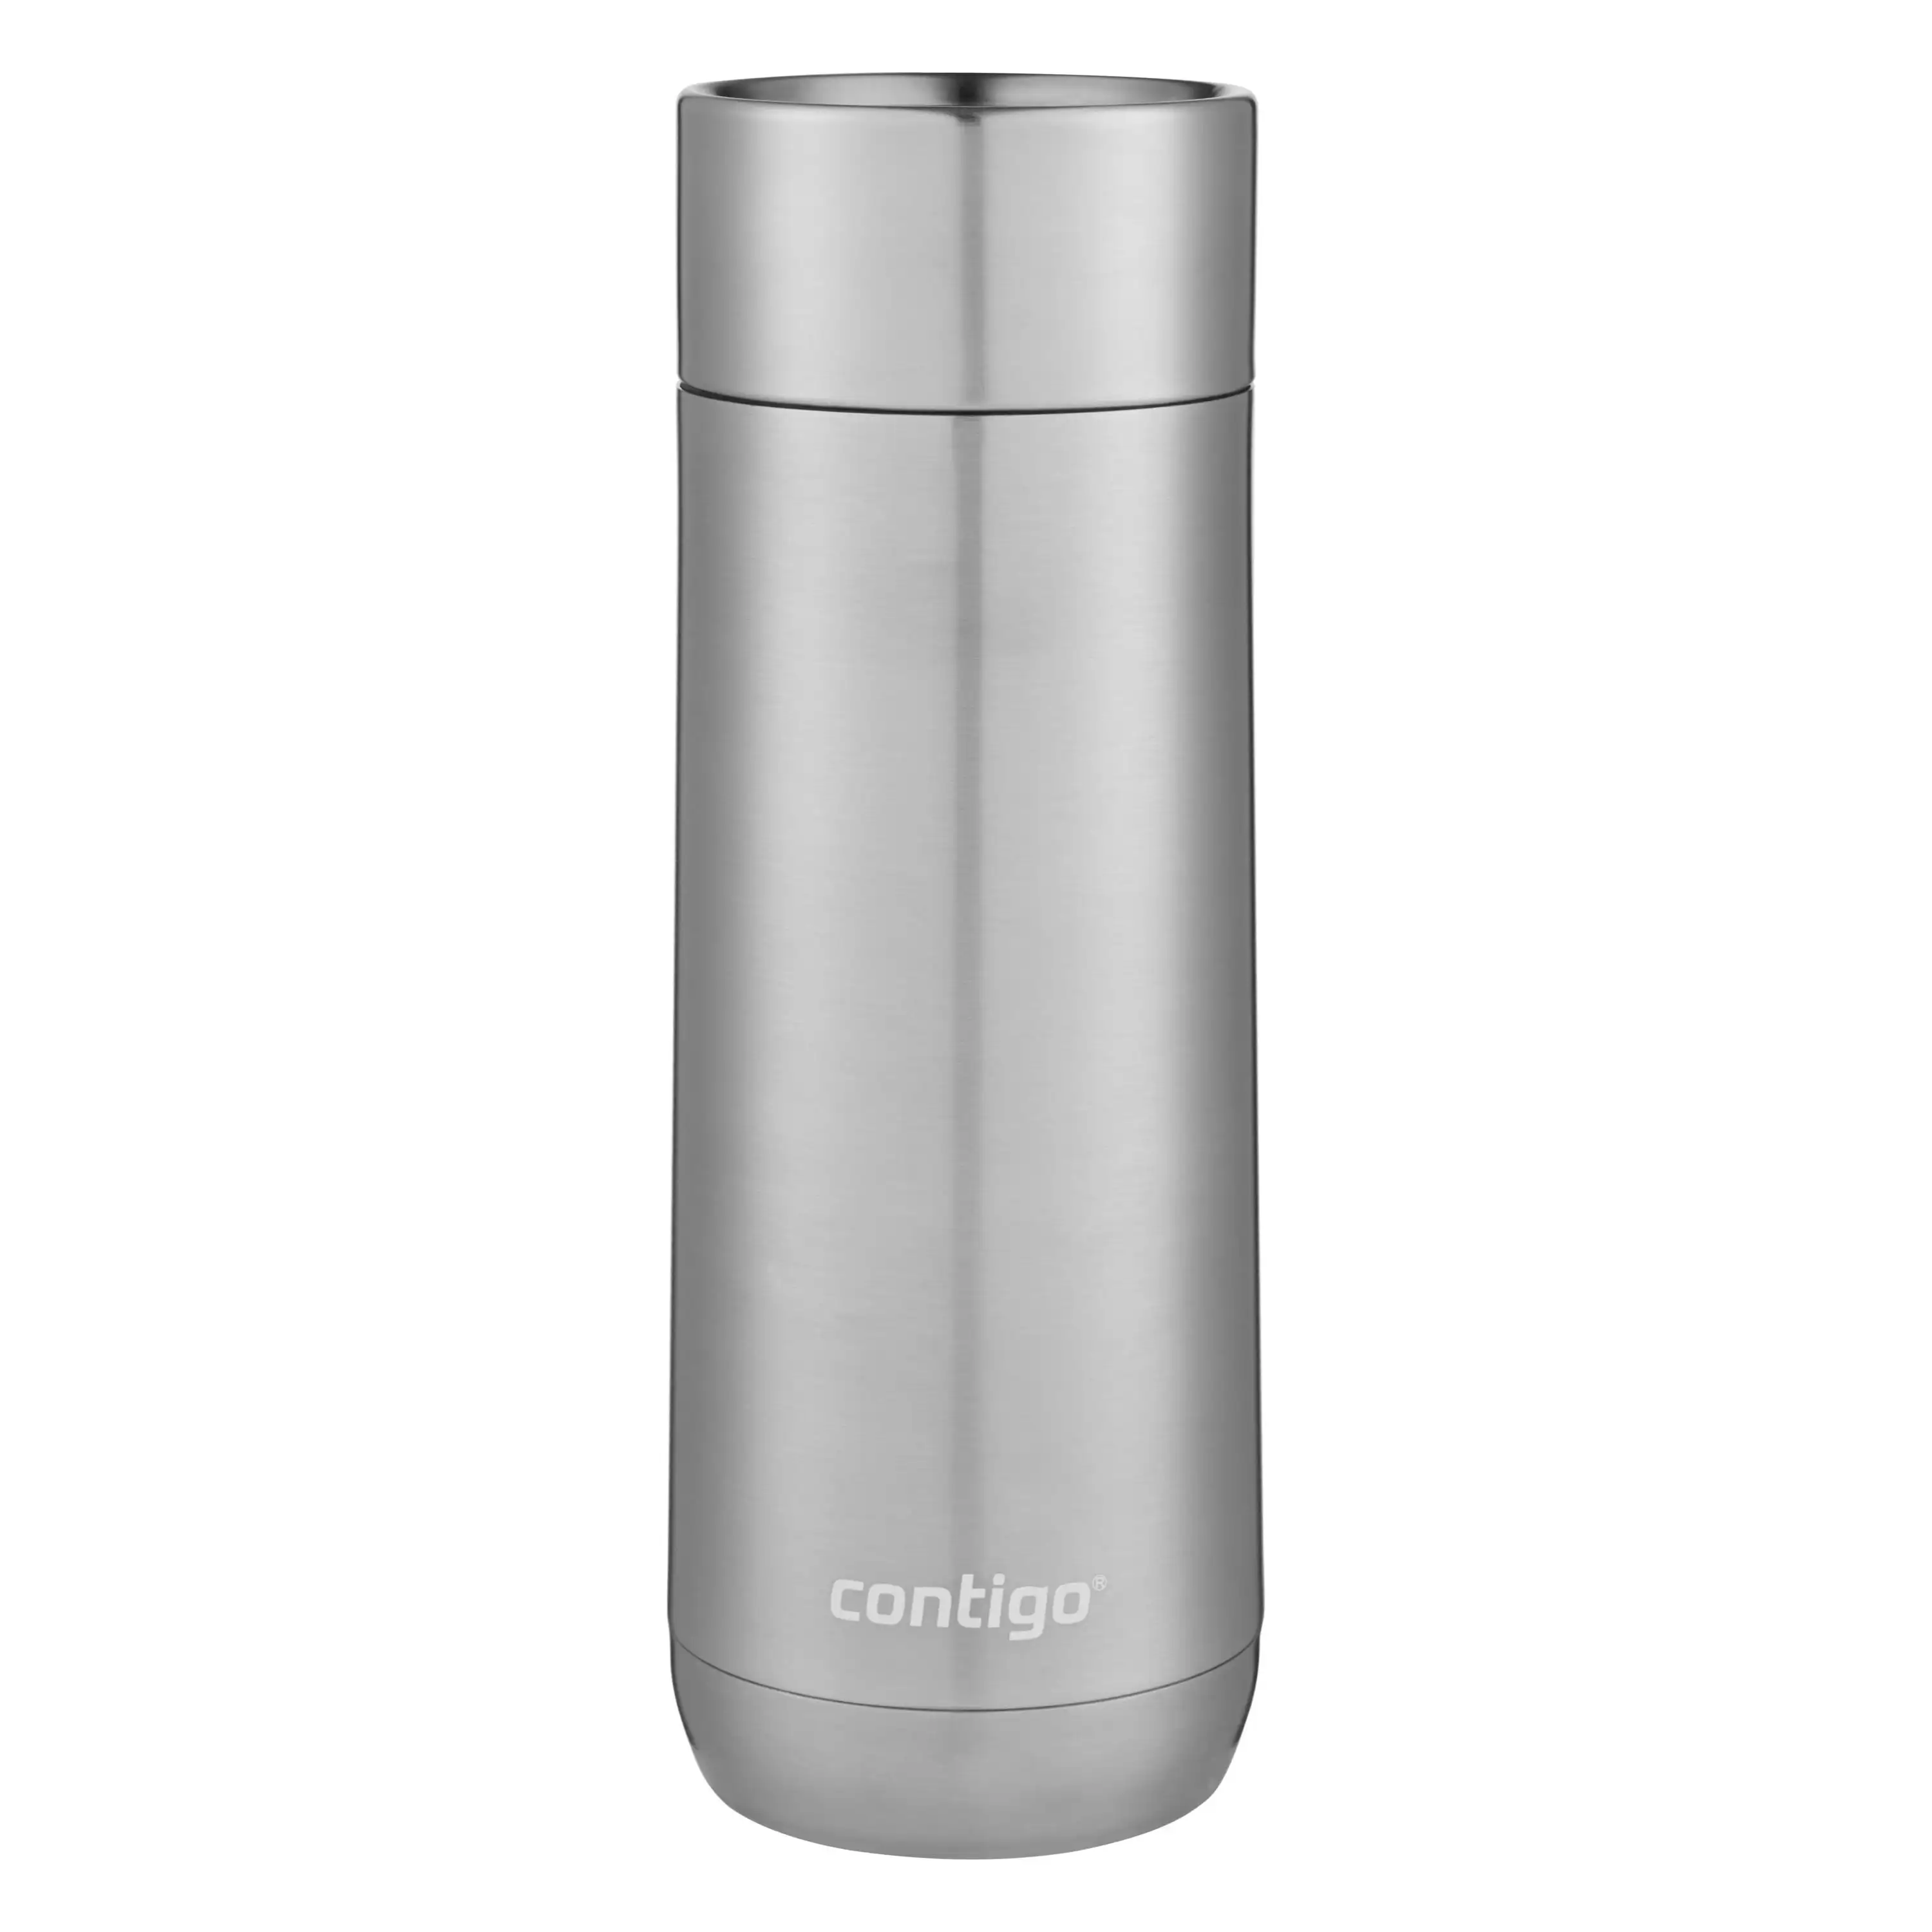 Contigo Luxe AUTOSEAL Vacuum-Insulated Travel Spill-Proof Stainless Steel